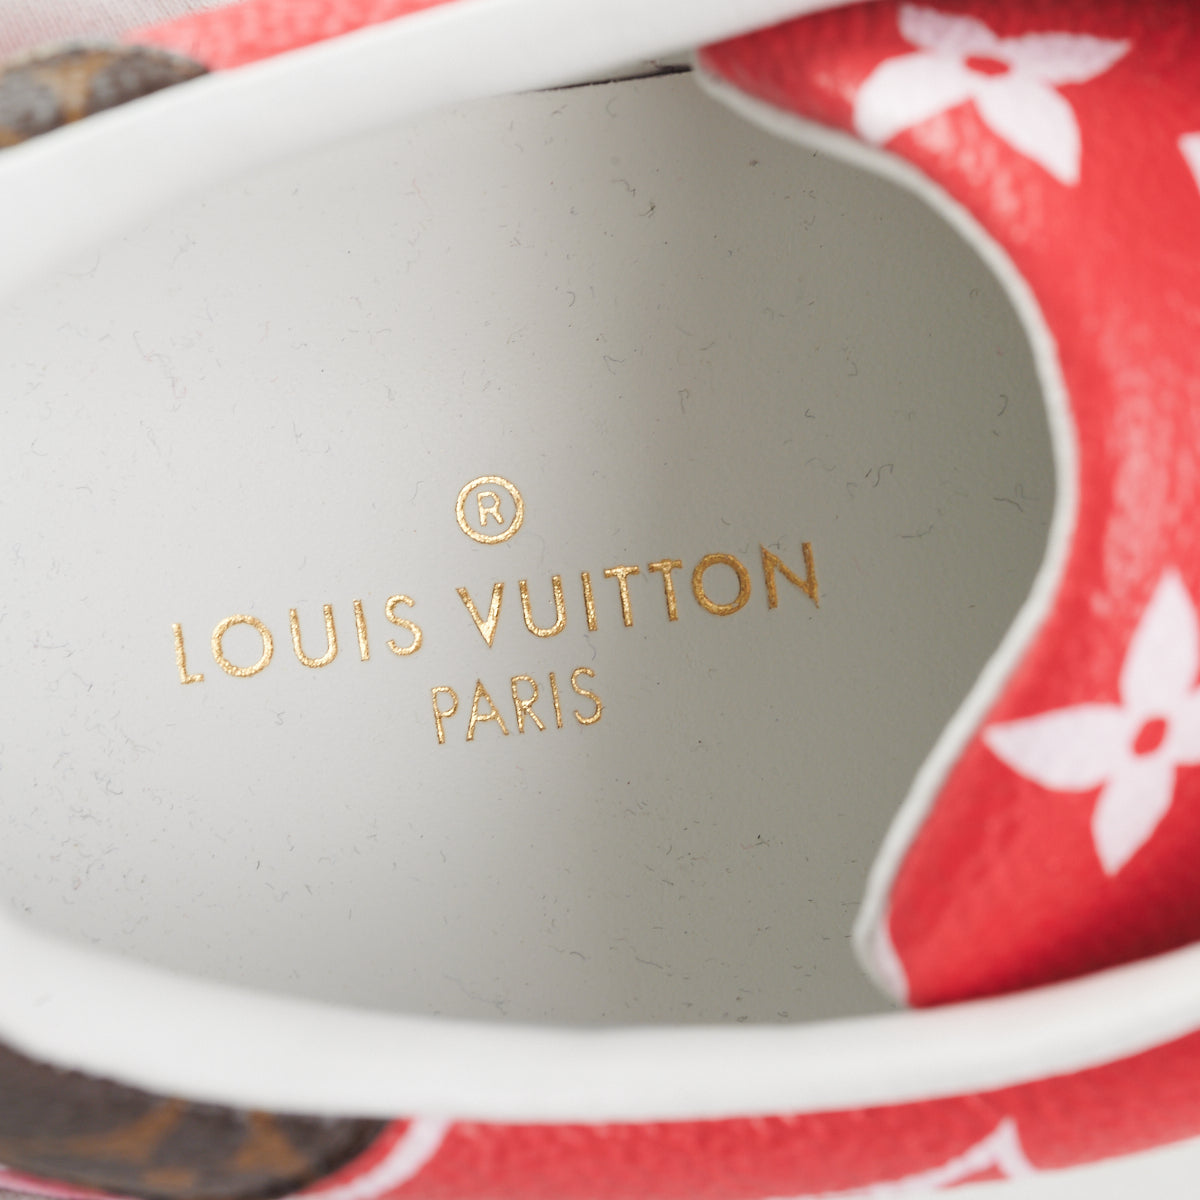 LOUIS VUITTON WOMEN'S TIME OUT SNEAKER WHITE/PINK FOR WOMEN - LV31 -  REPGOD.ORG/IS - Trusted Replica Products - ReplicaGods - REPGODS.ORG